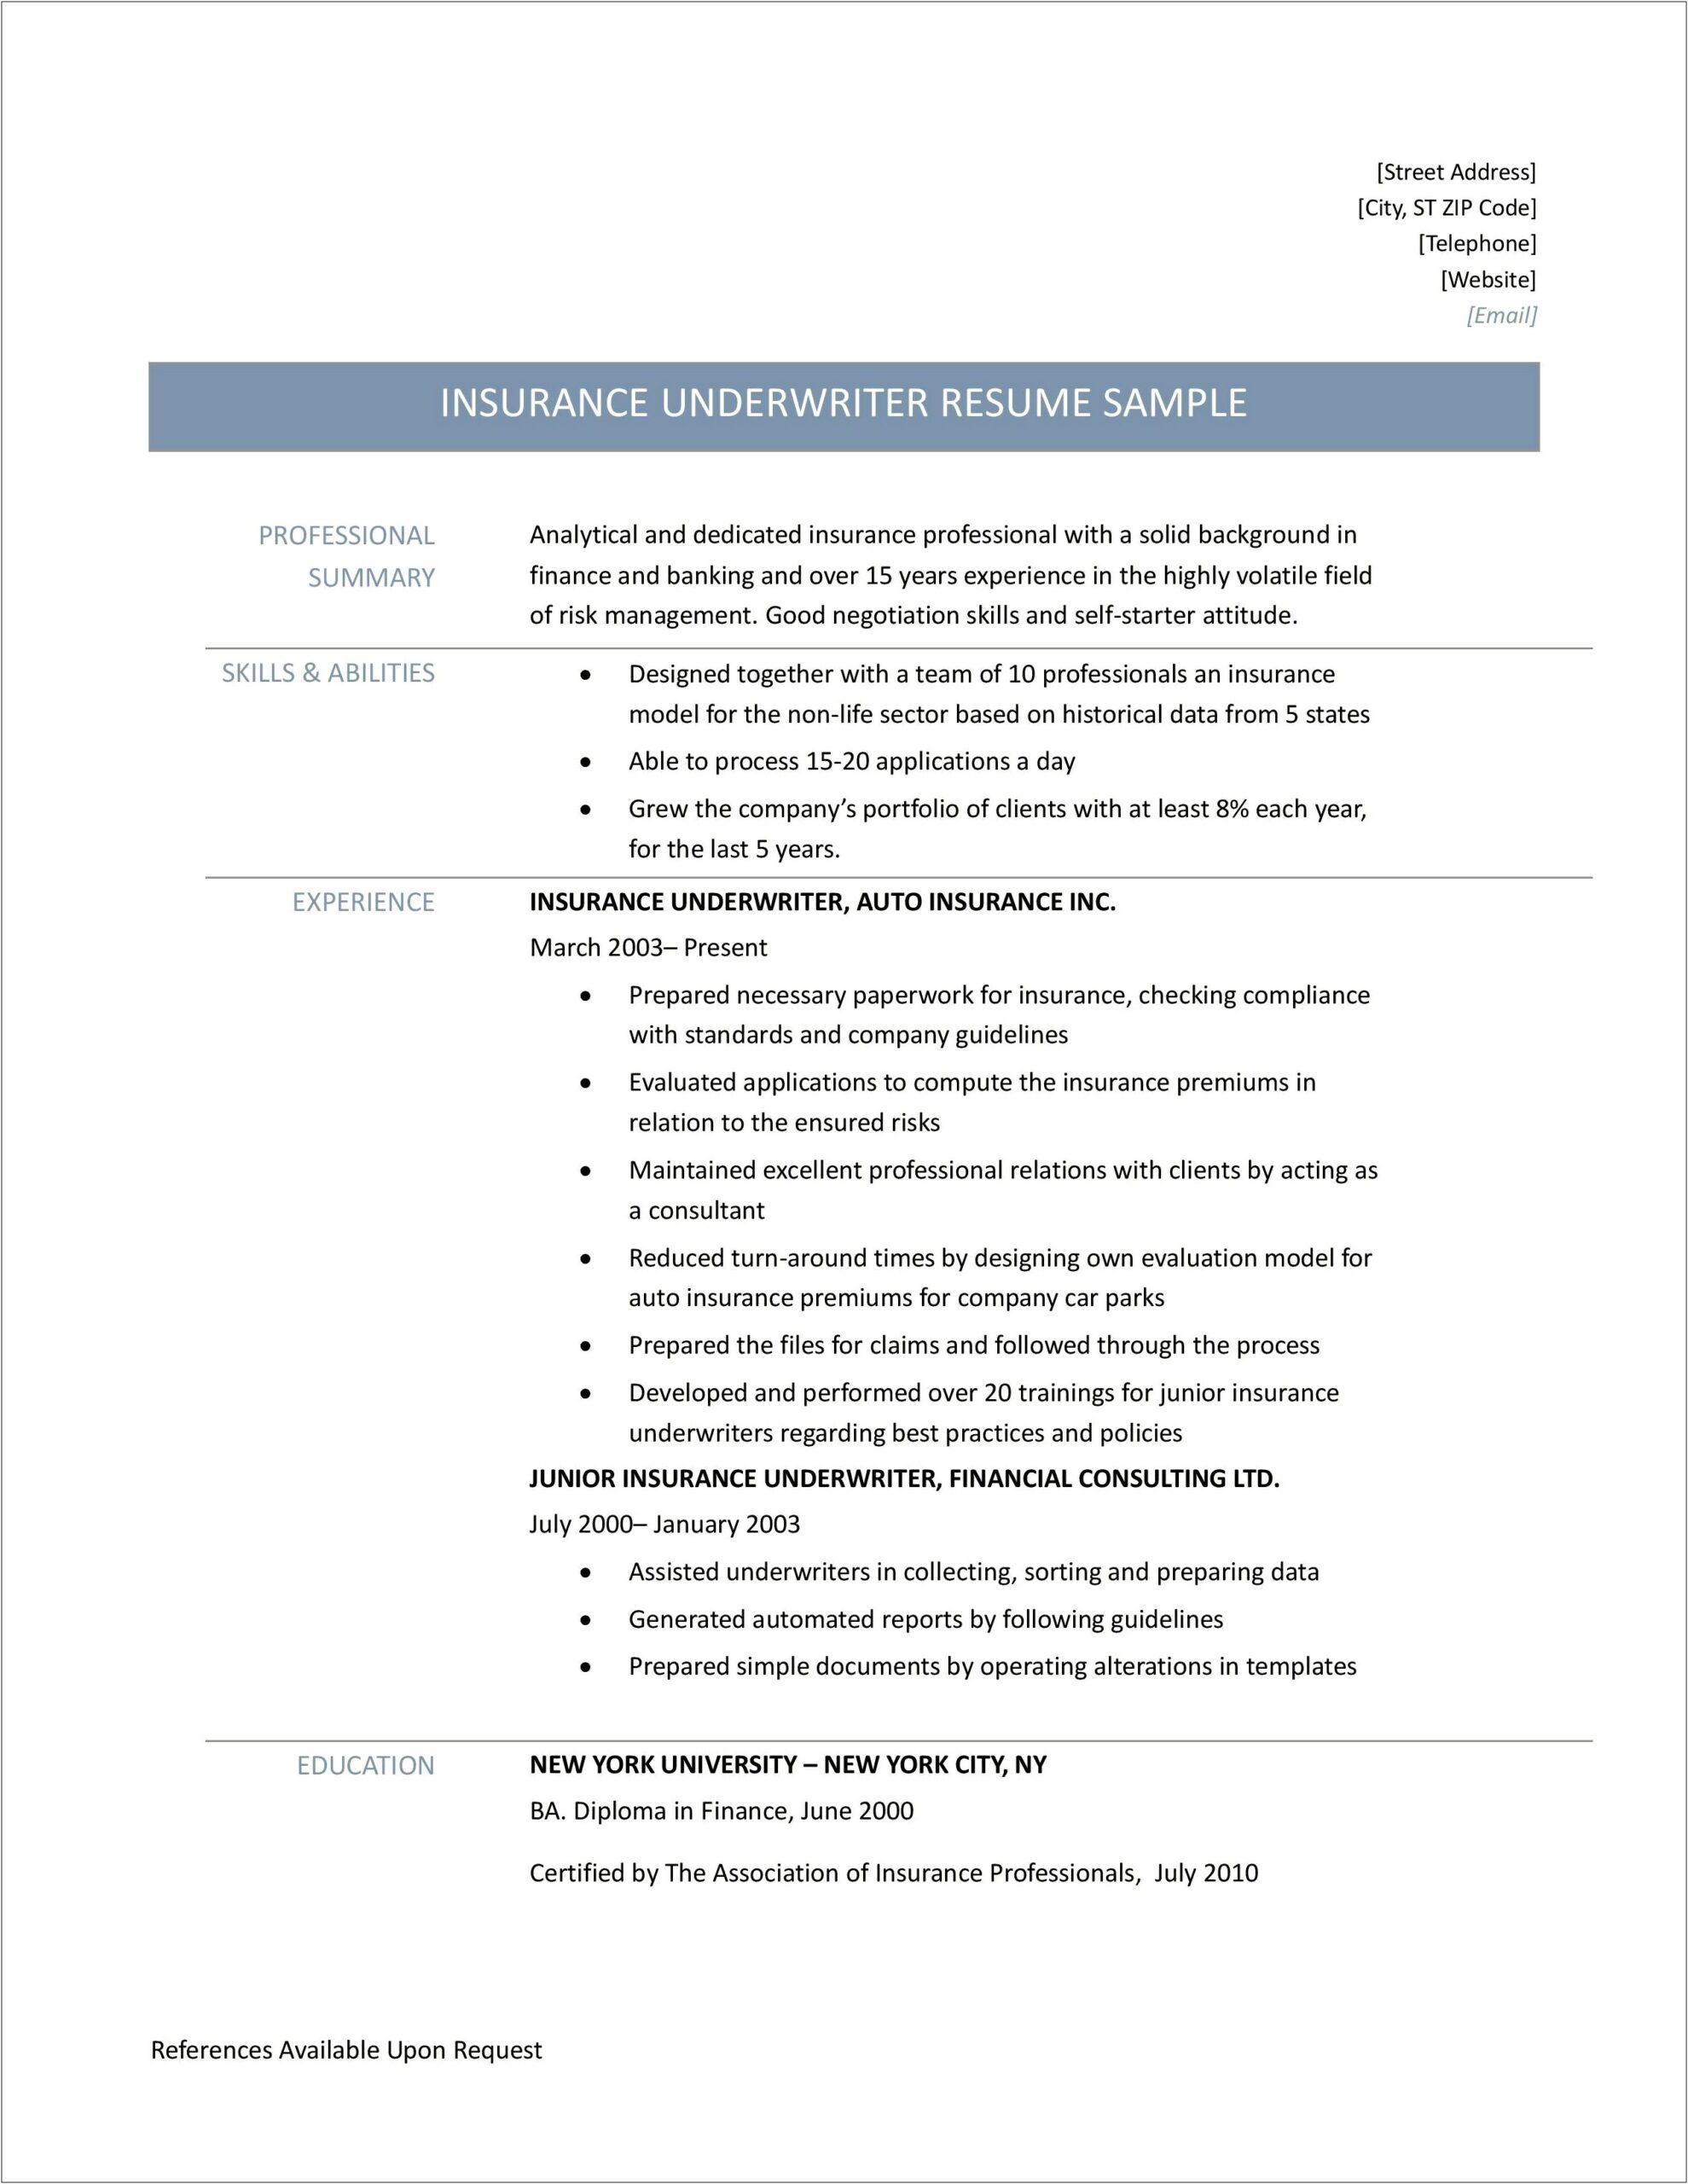 Resume Format For Life Insurance Branch Manager